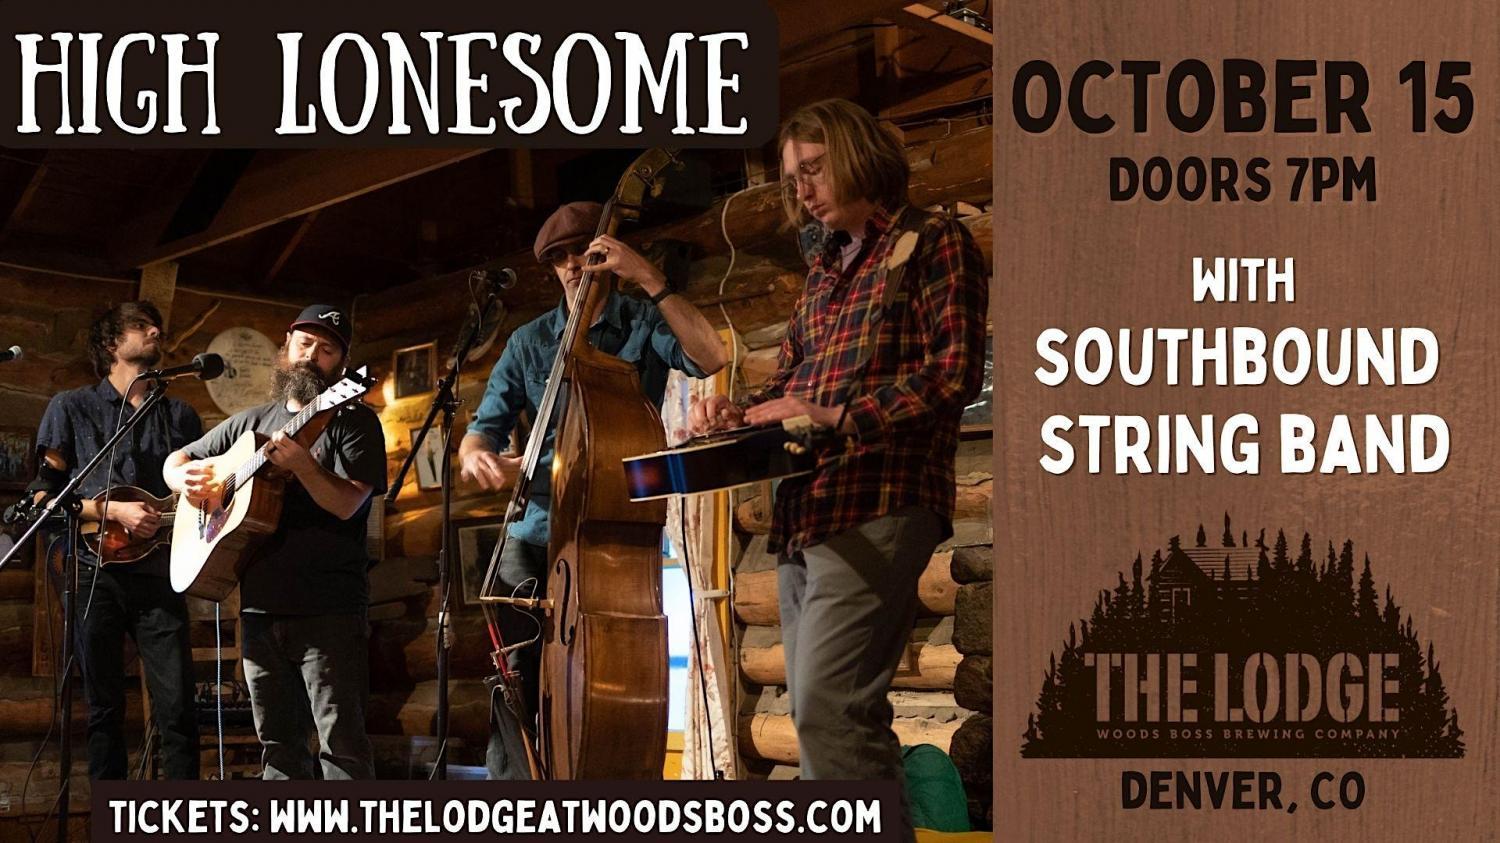 High Lonesome w/ Southbound String Band in The Lodge
Sat Oct 15, 7:00 PM - Sat Oct 15, 11:30 PM